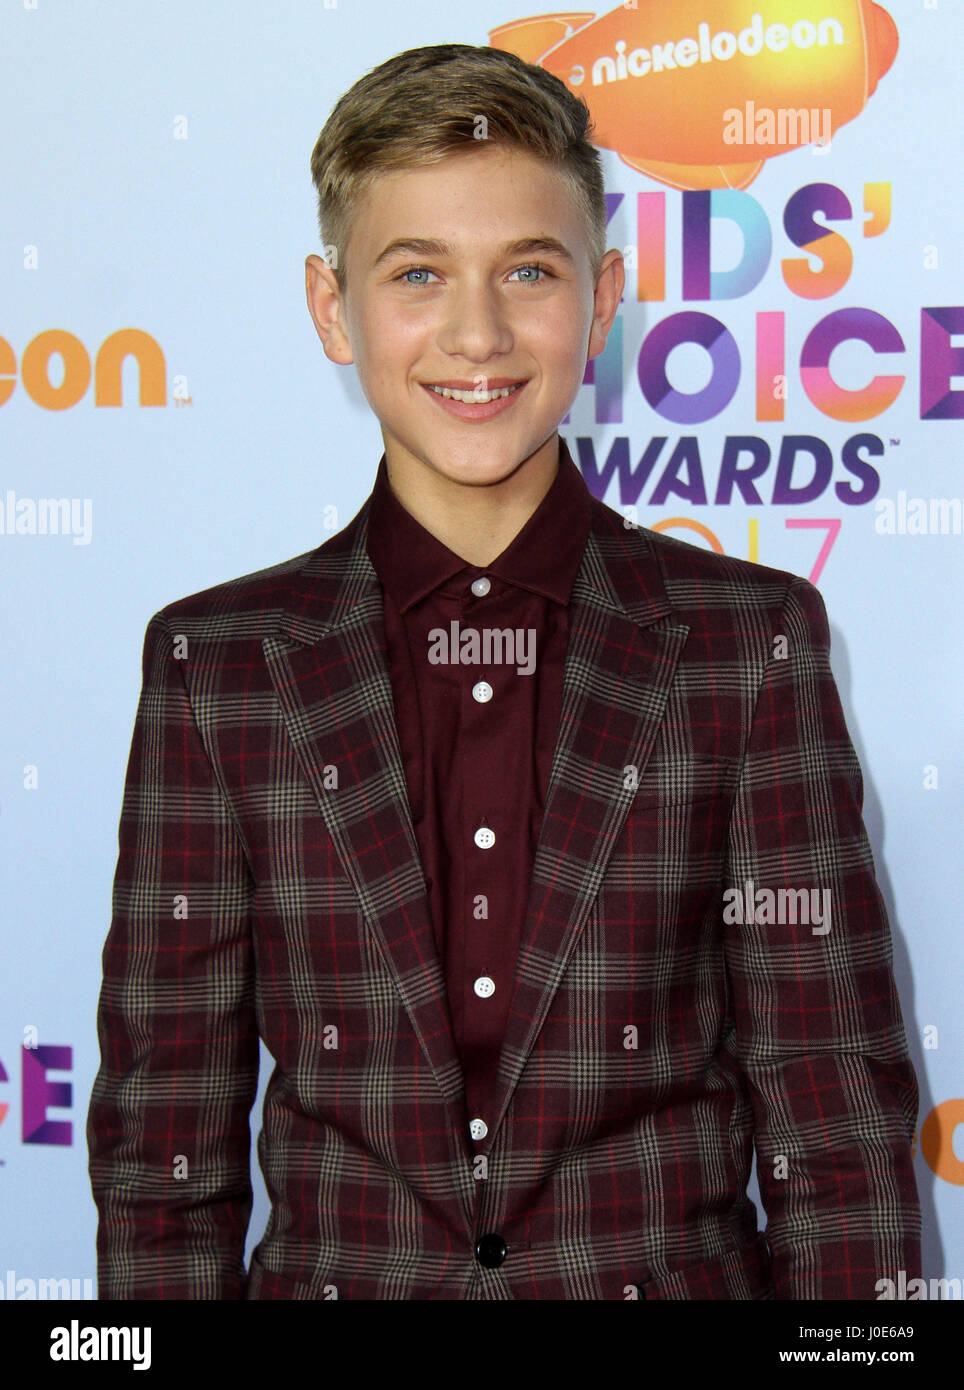 Nickelodeon’s 2017 Kids’ Choice Awards held at the Galen Center in Los Angeles - Arrivals  Featuring: Thomas Kuc Where: Los Angeles, California, United States When: 11 Mar 2017 Stock Photo